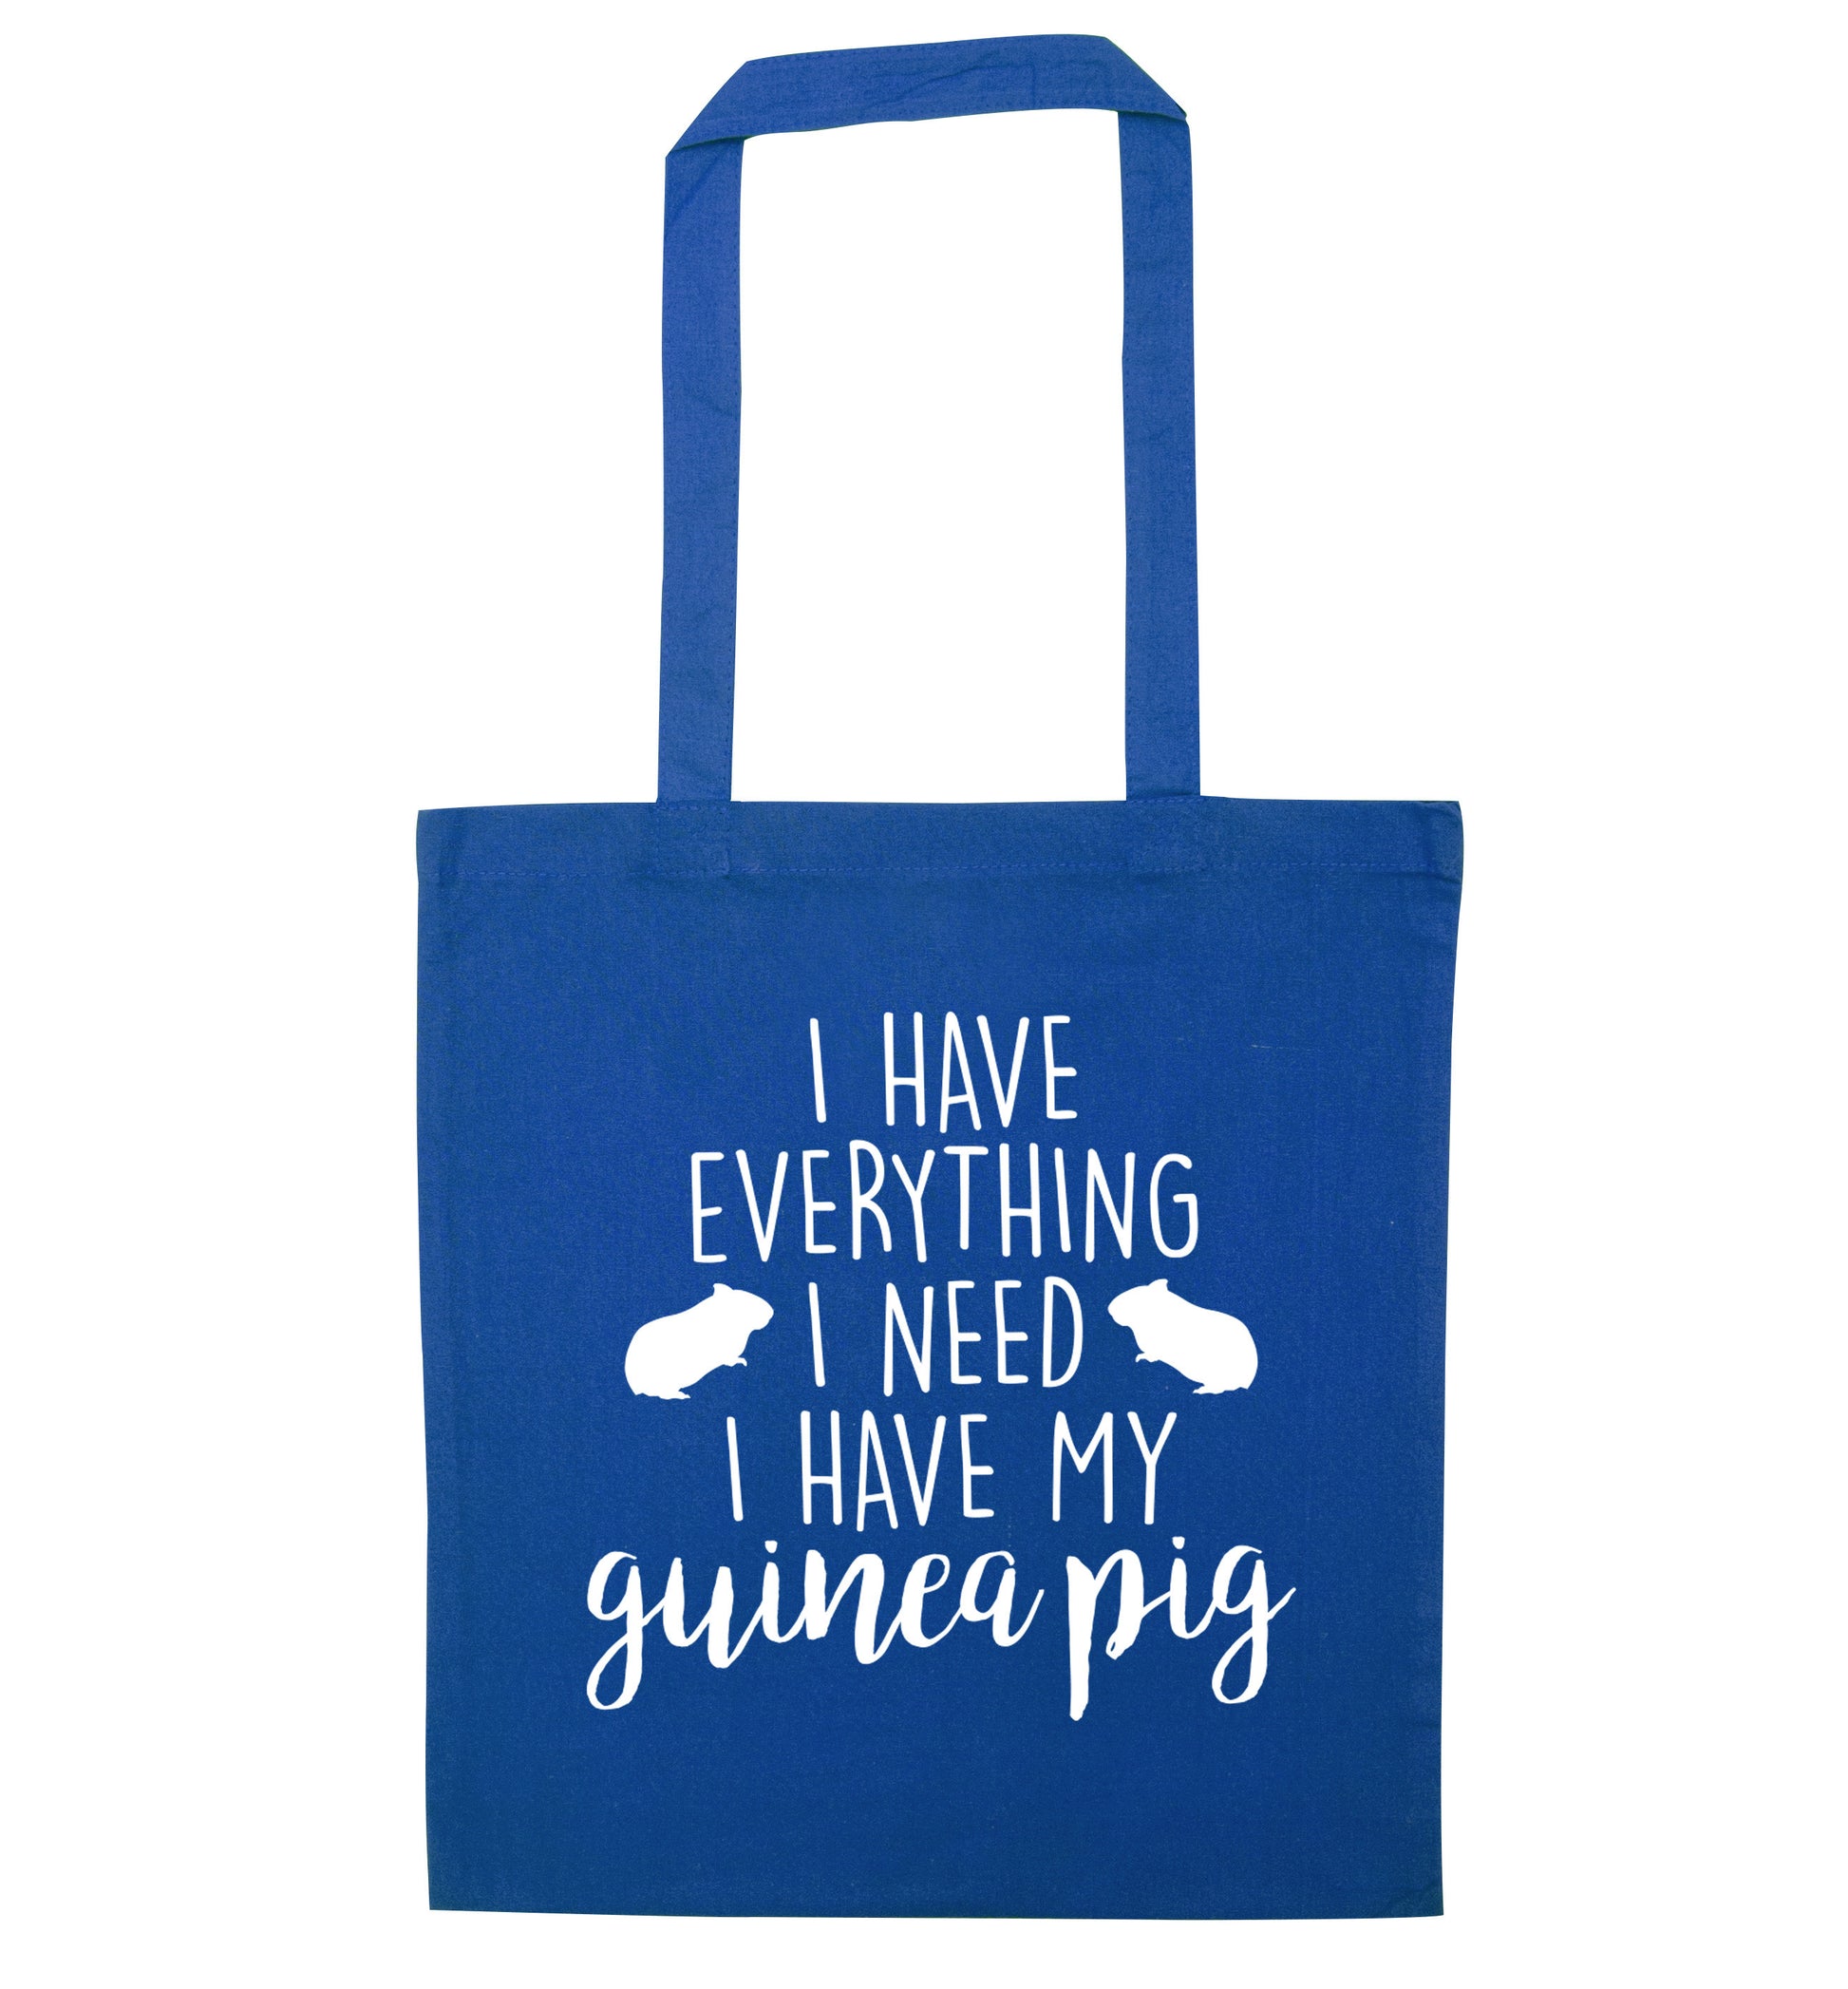 I have everything I need, I have my guinea pig blue tote bag